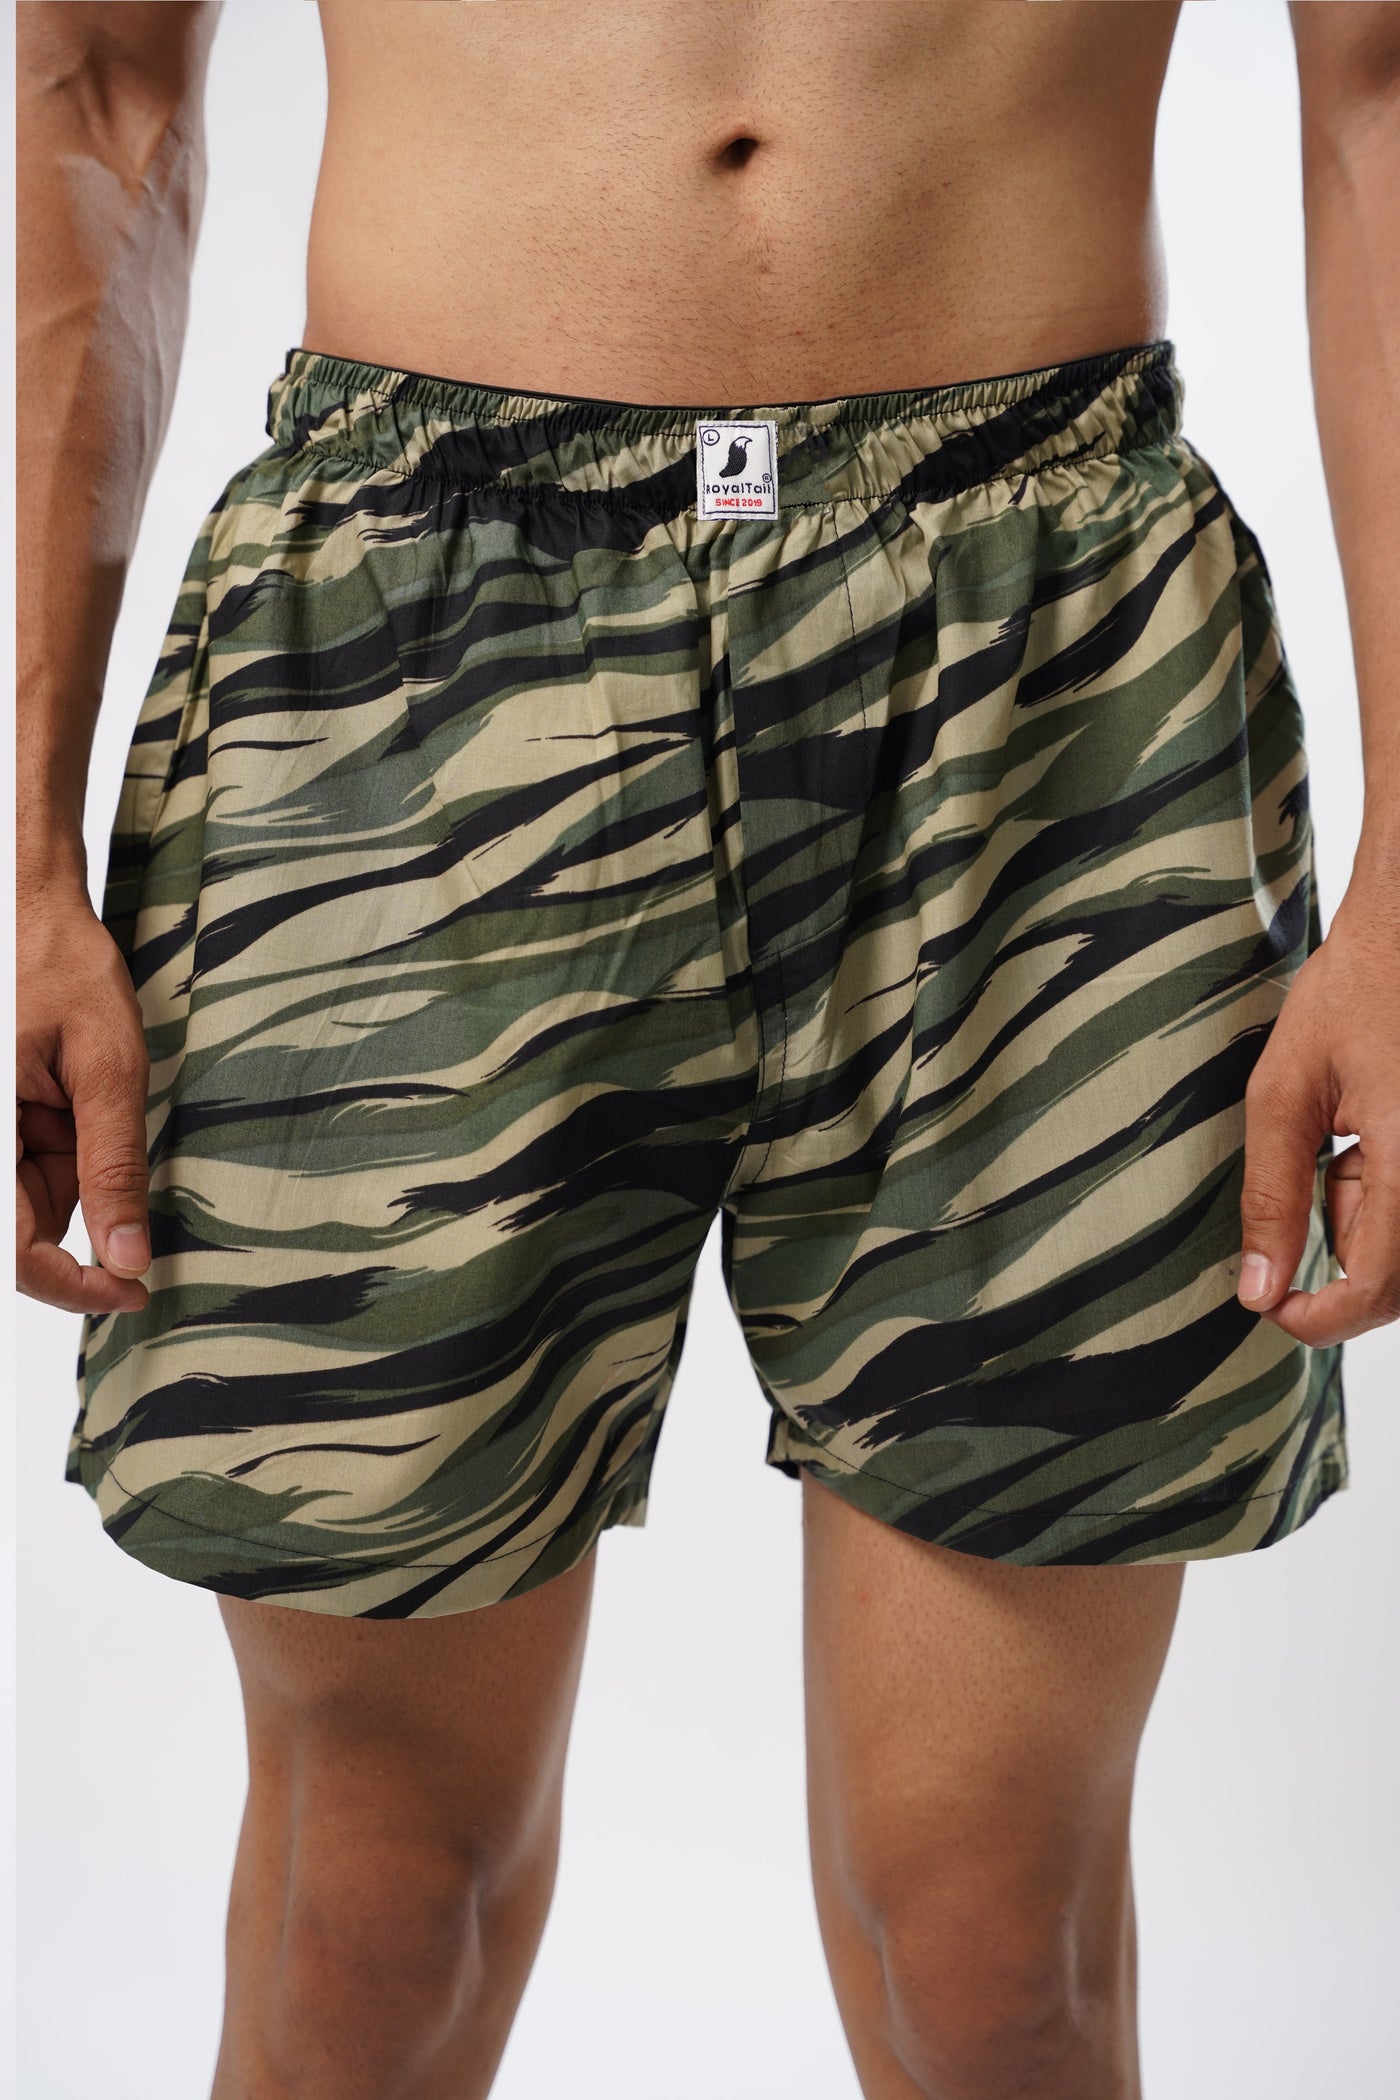 GREEN ARMY ALL OVER PRINTED MENS BOXERS